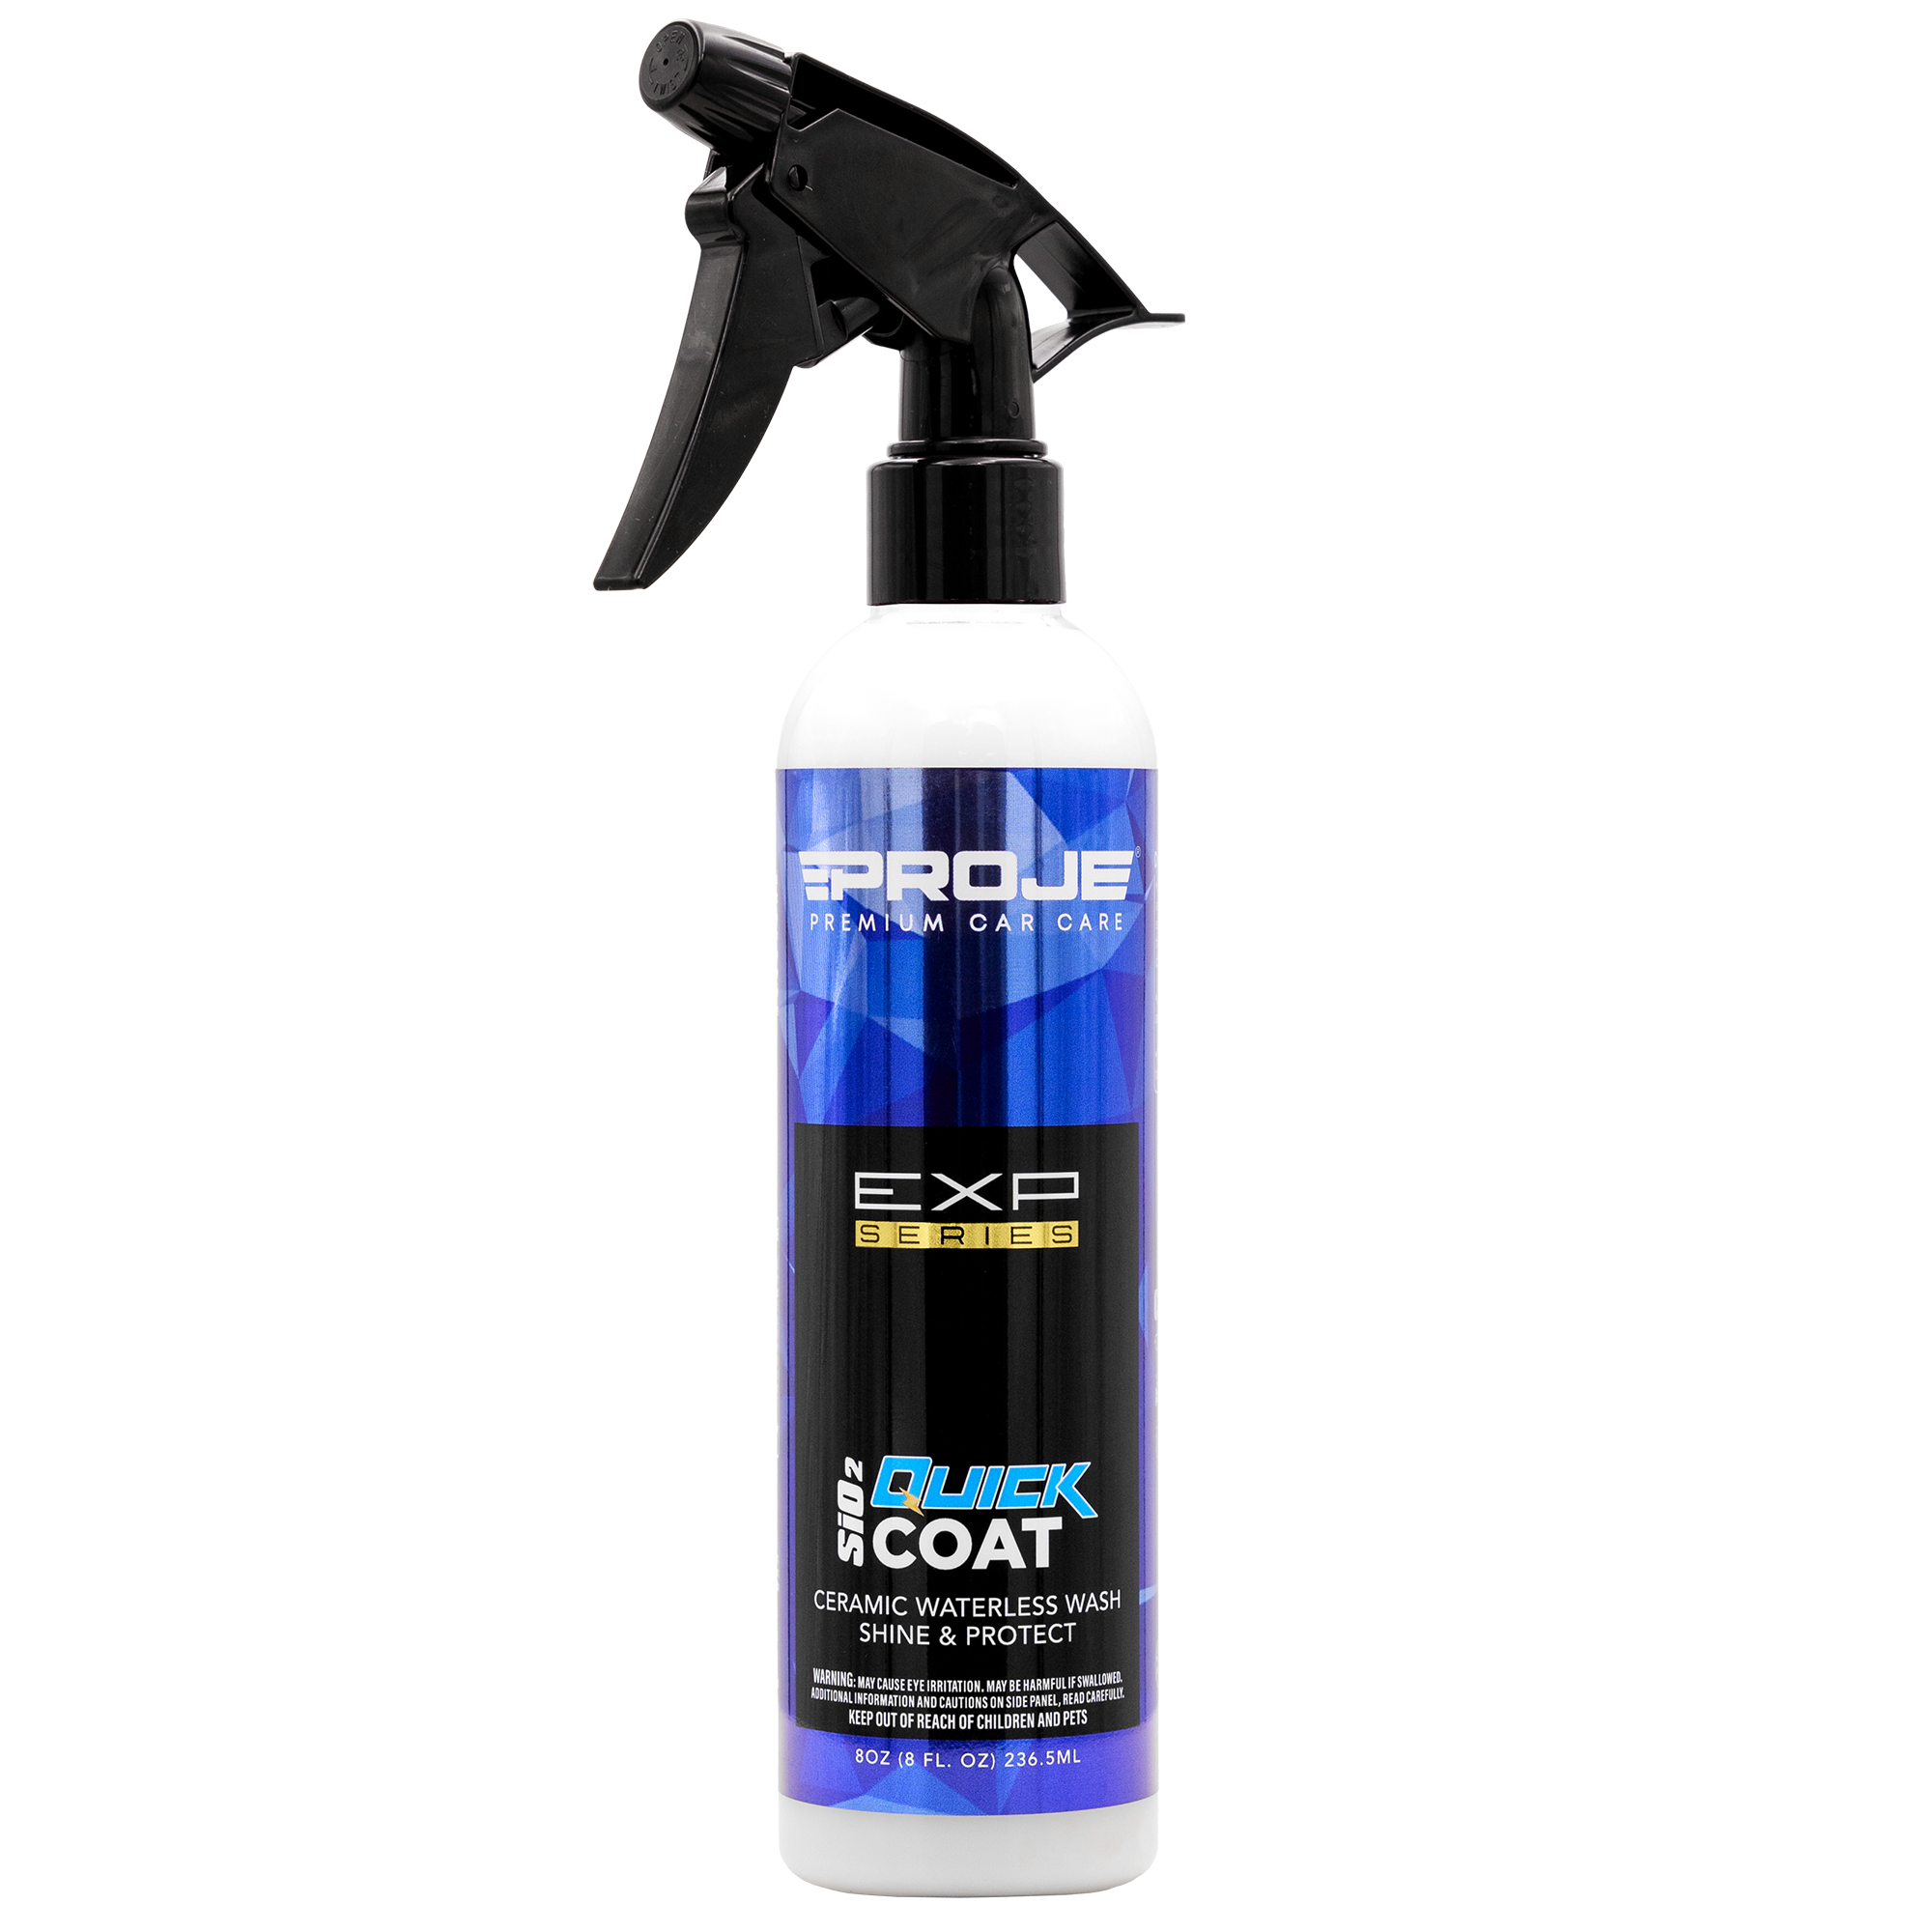 Slick Products SP1264 Shine & Protectant Spray Coating High-Gloss Lus